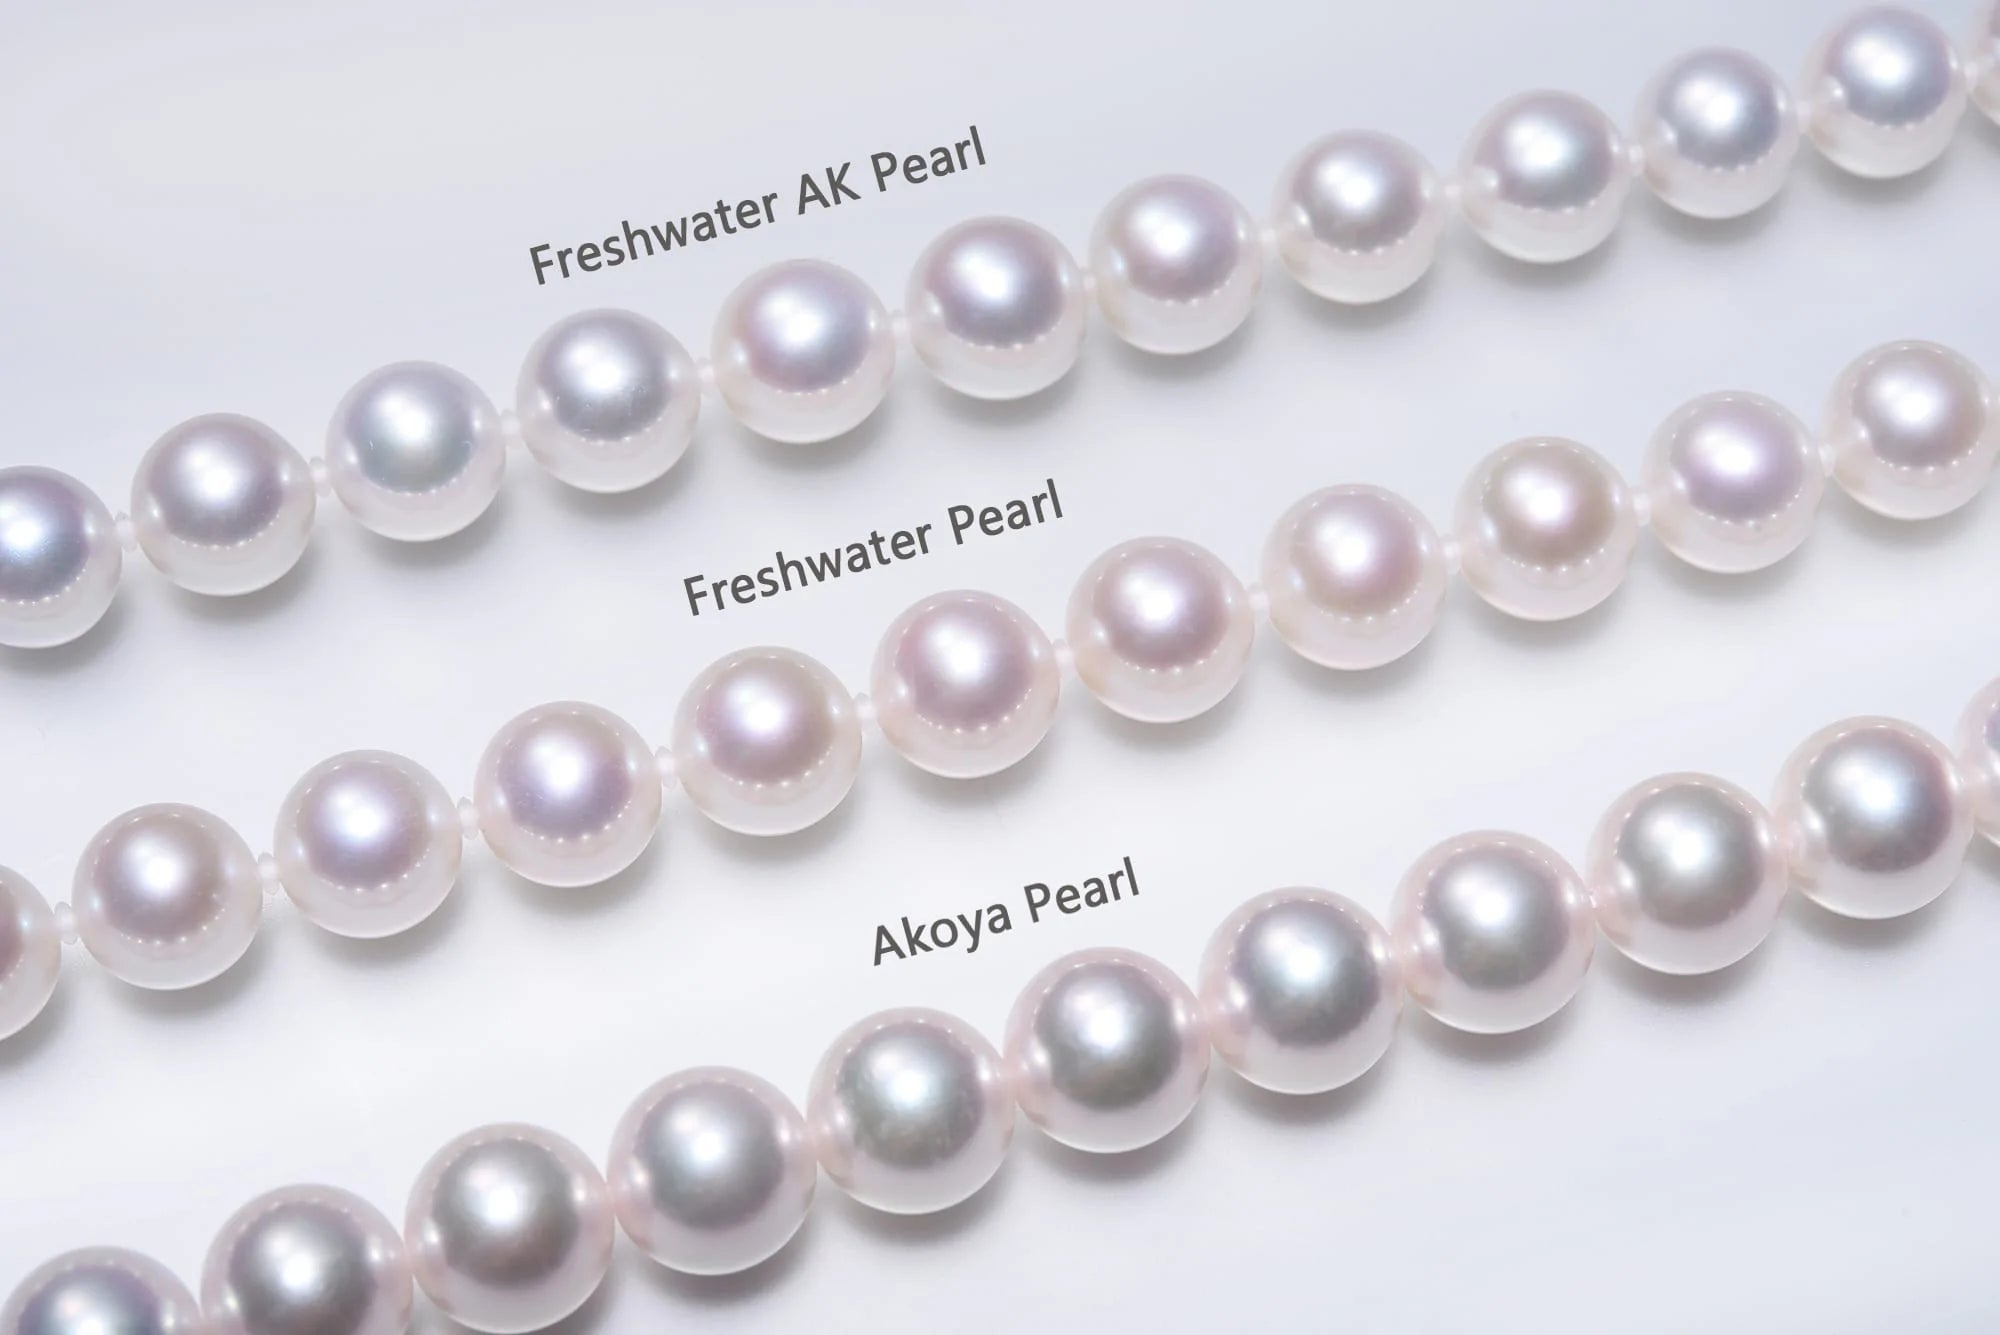 What is Akoya pearls?